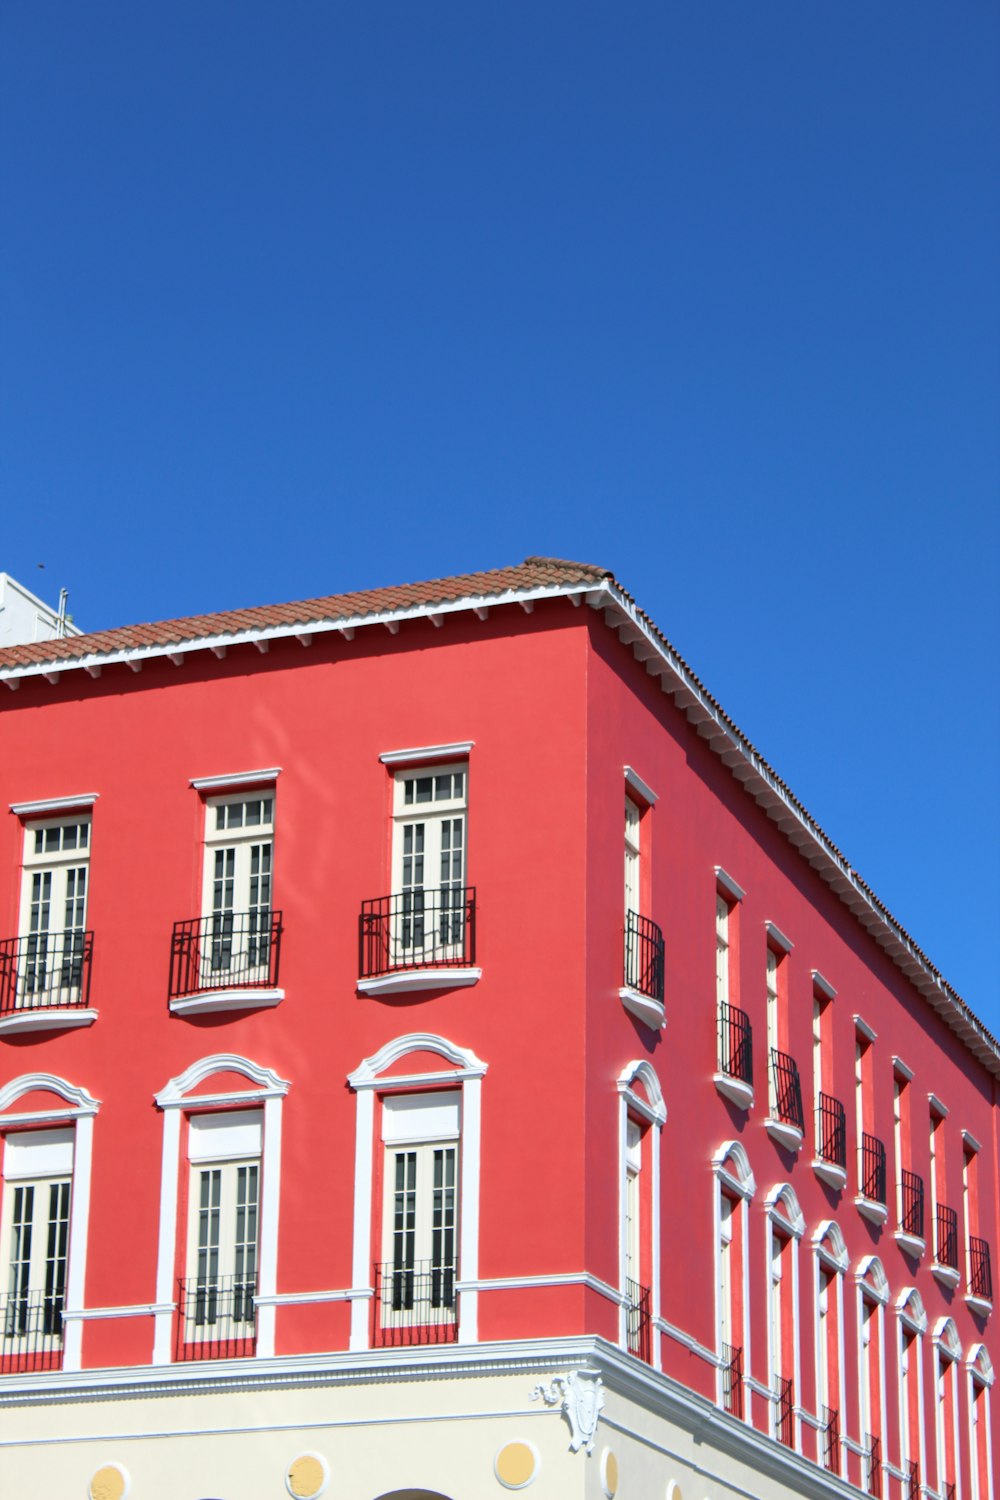 red and white concrete building under blue sky during daytime